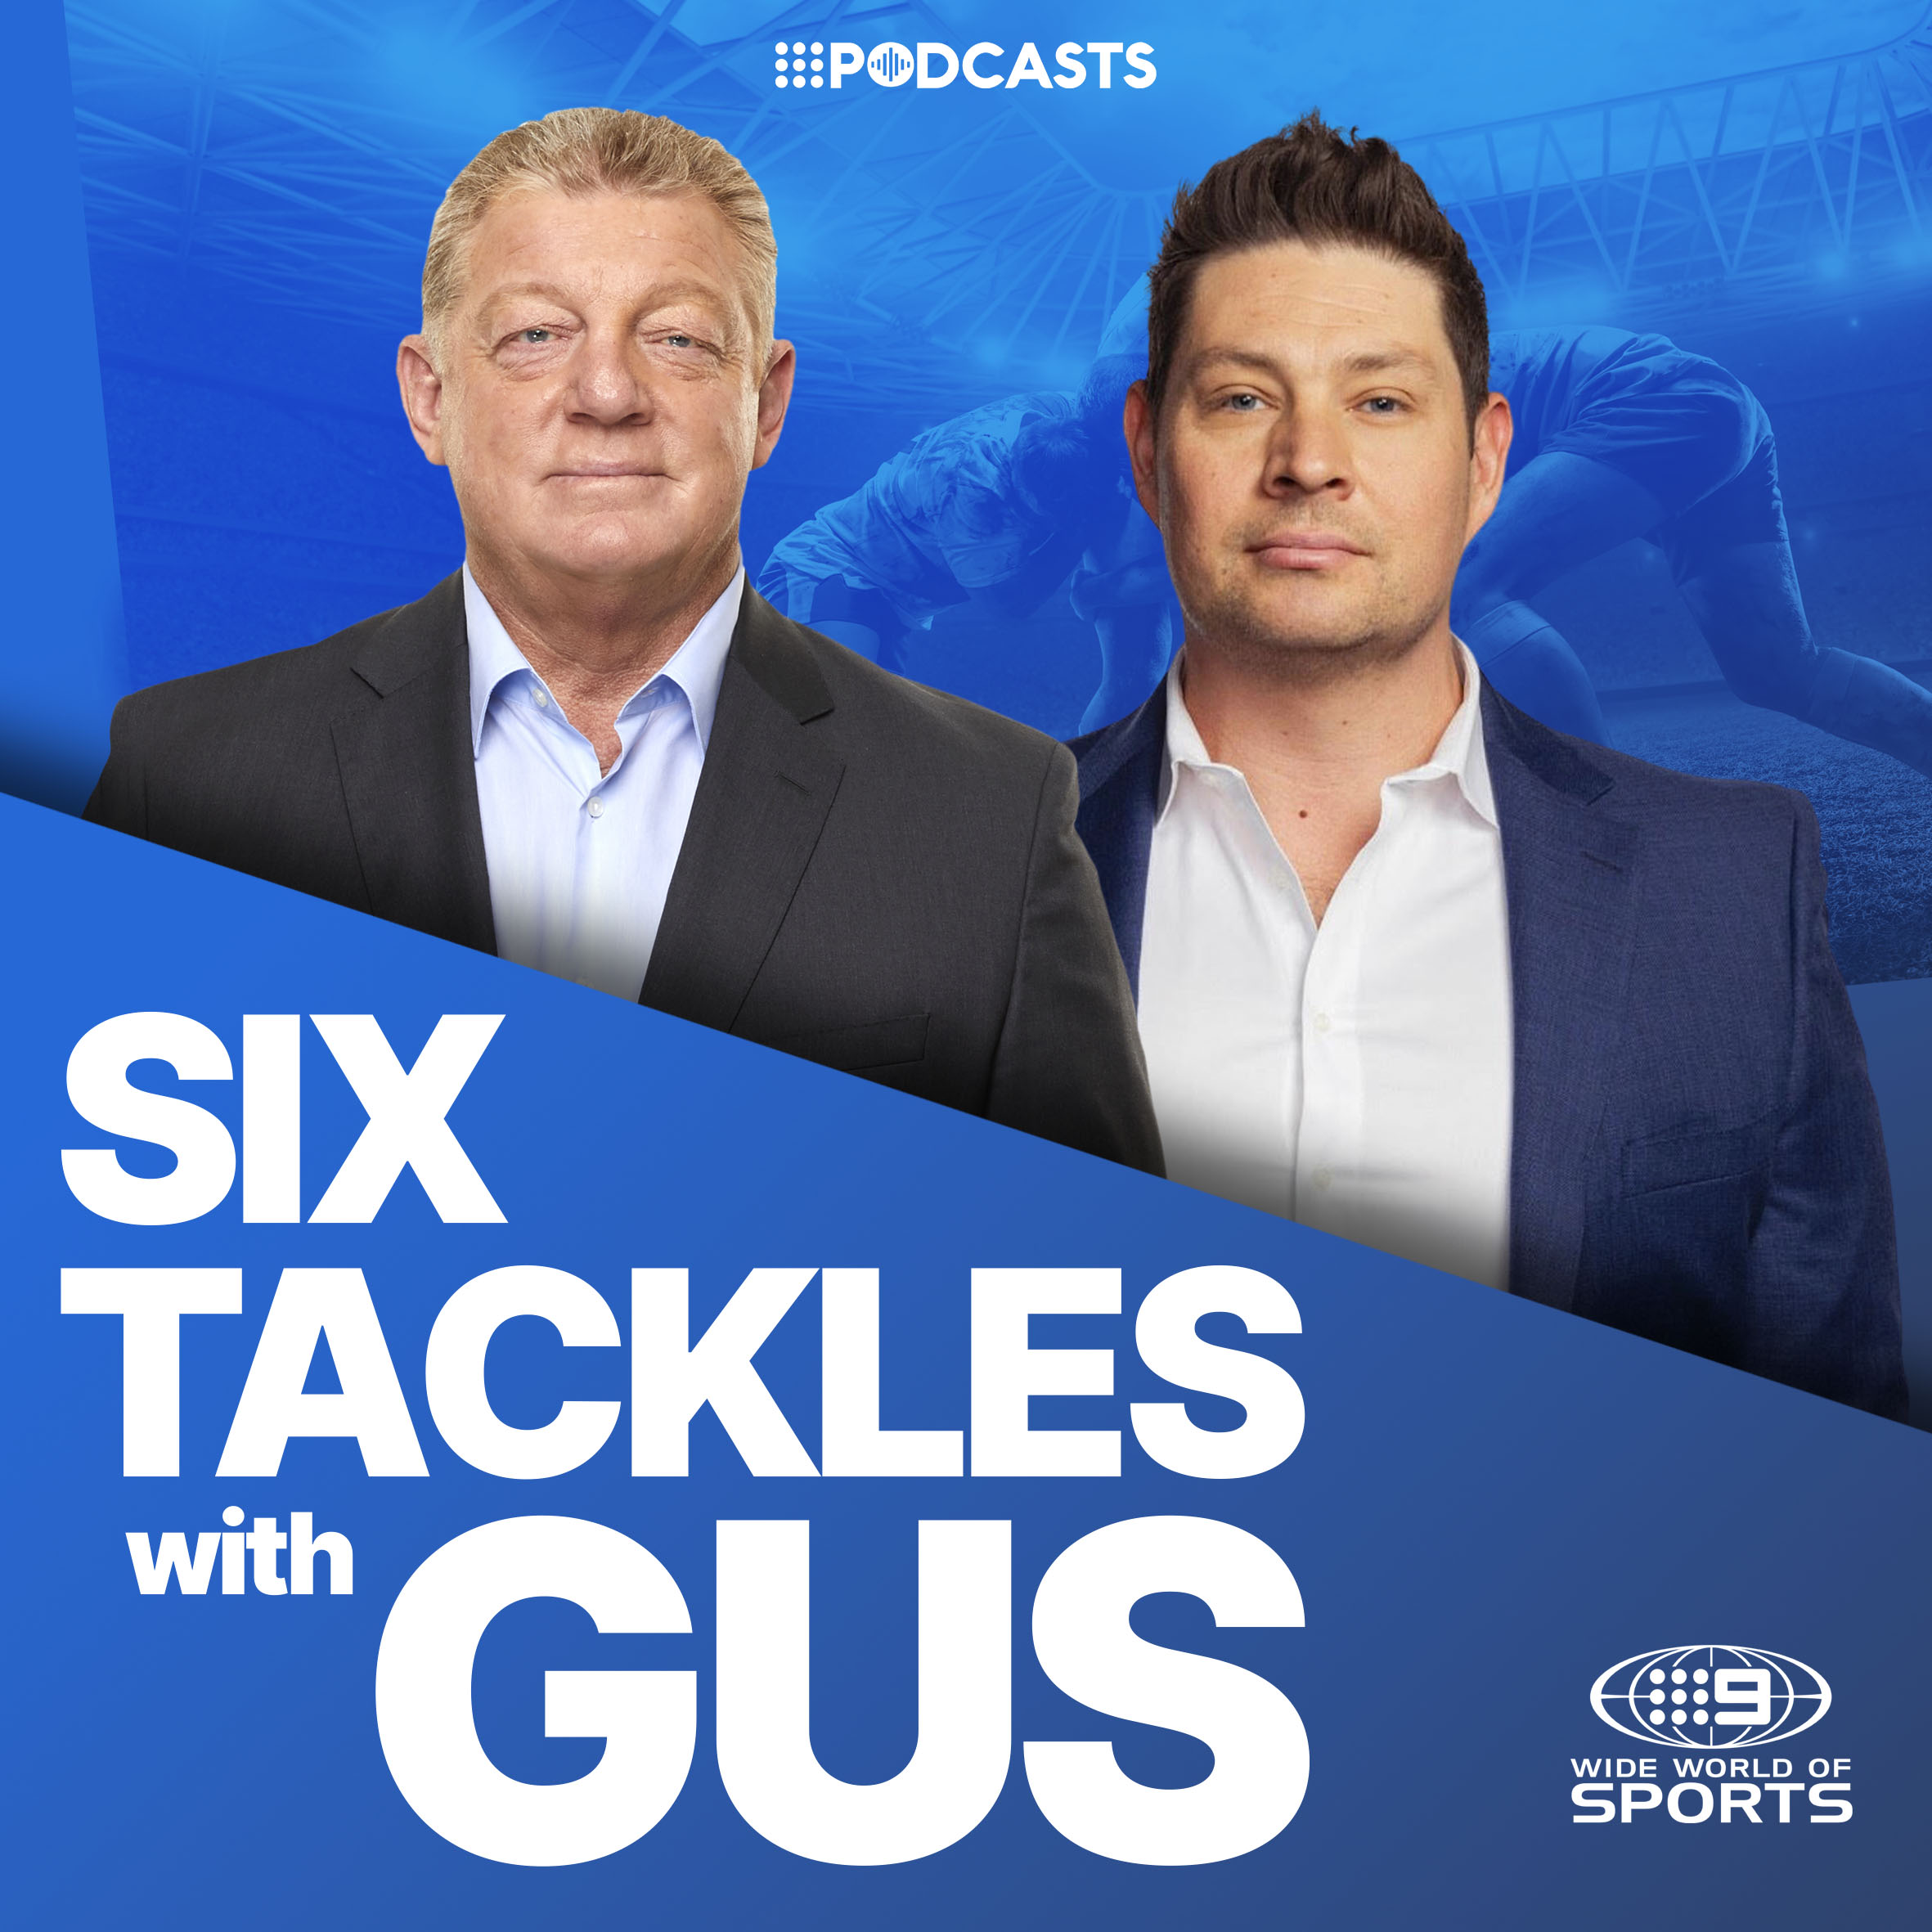 Gus responds to the Bulldogs 'walkout' reports